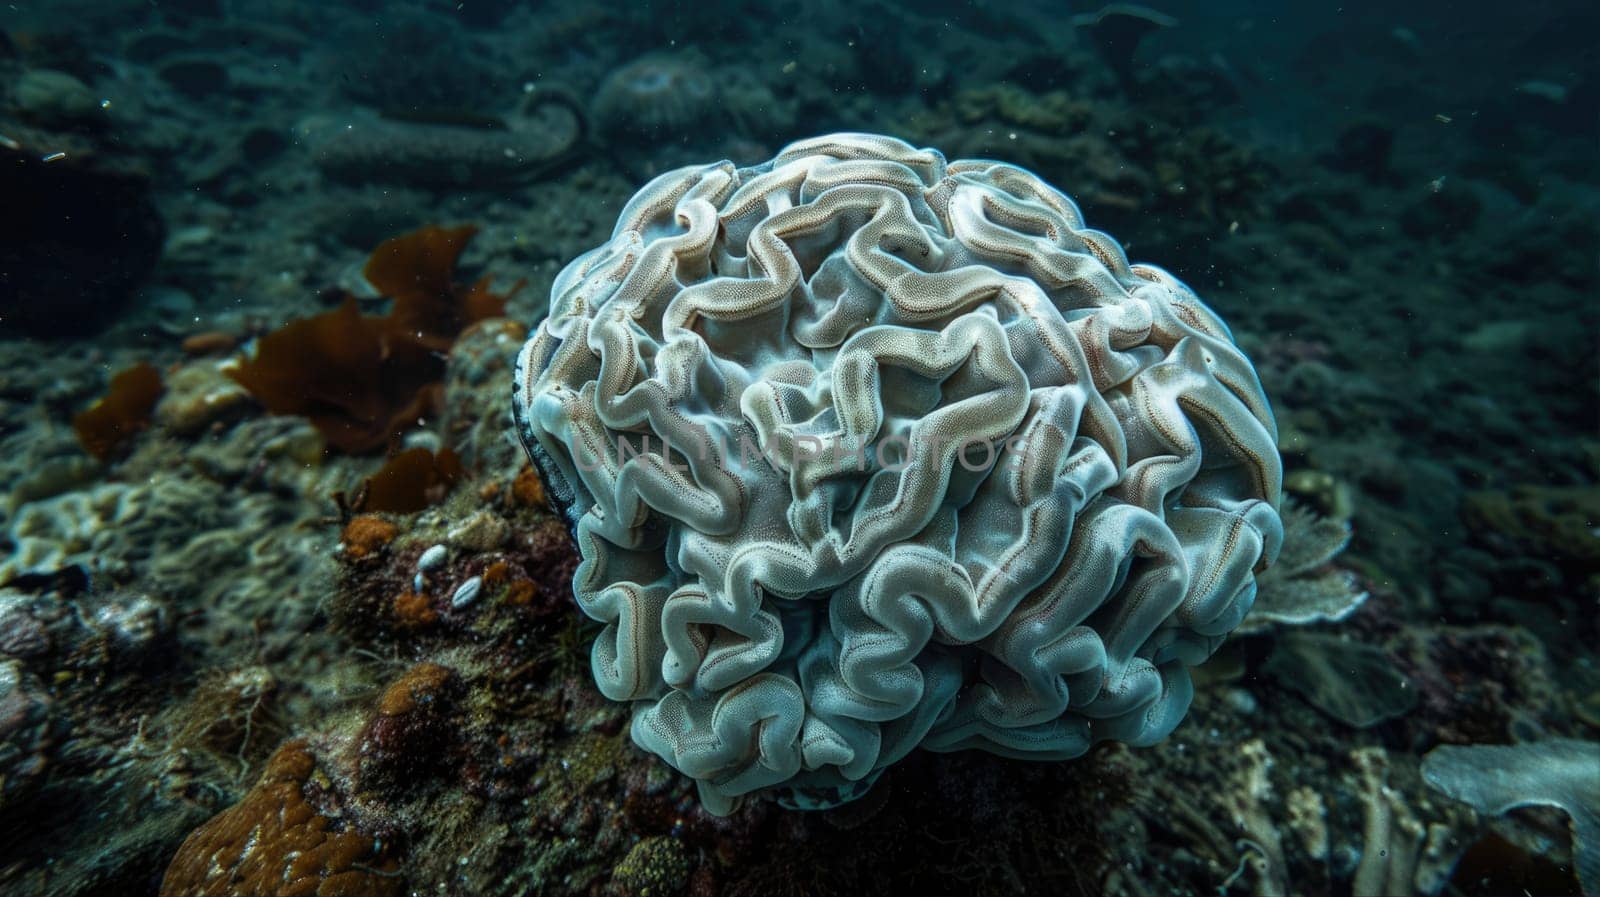 The organism resembling a brain found in coral reefs underwater is a large coral, a vital component of marine biology AI